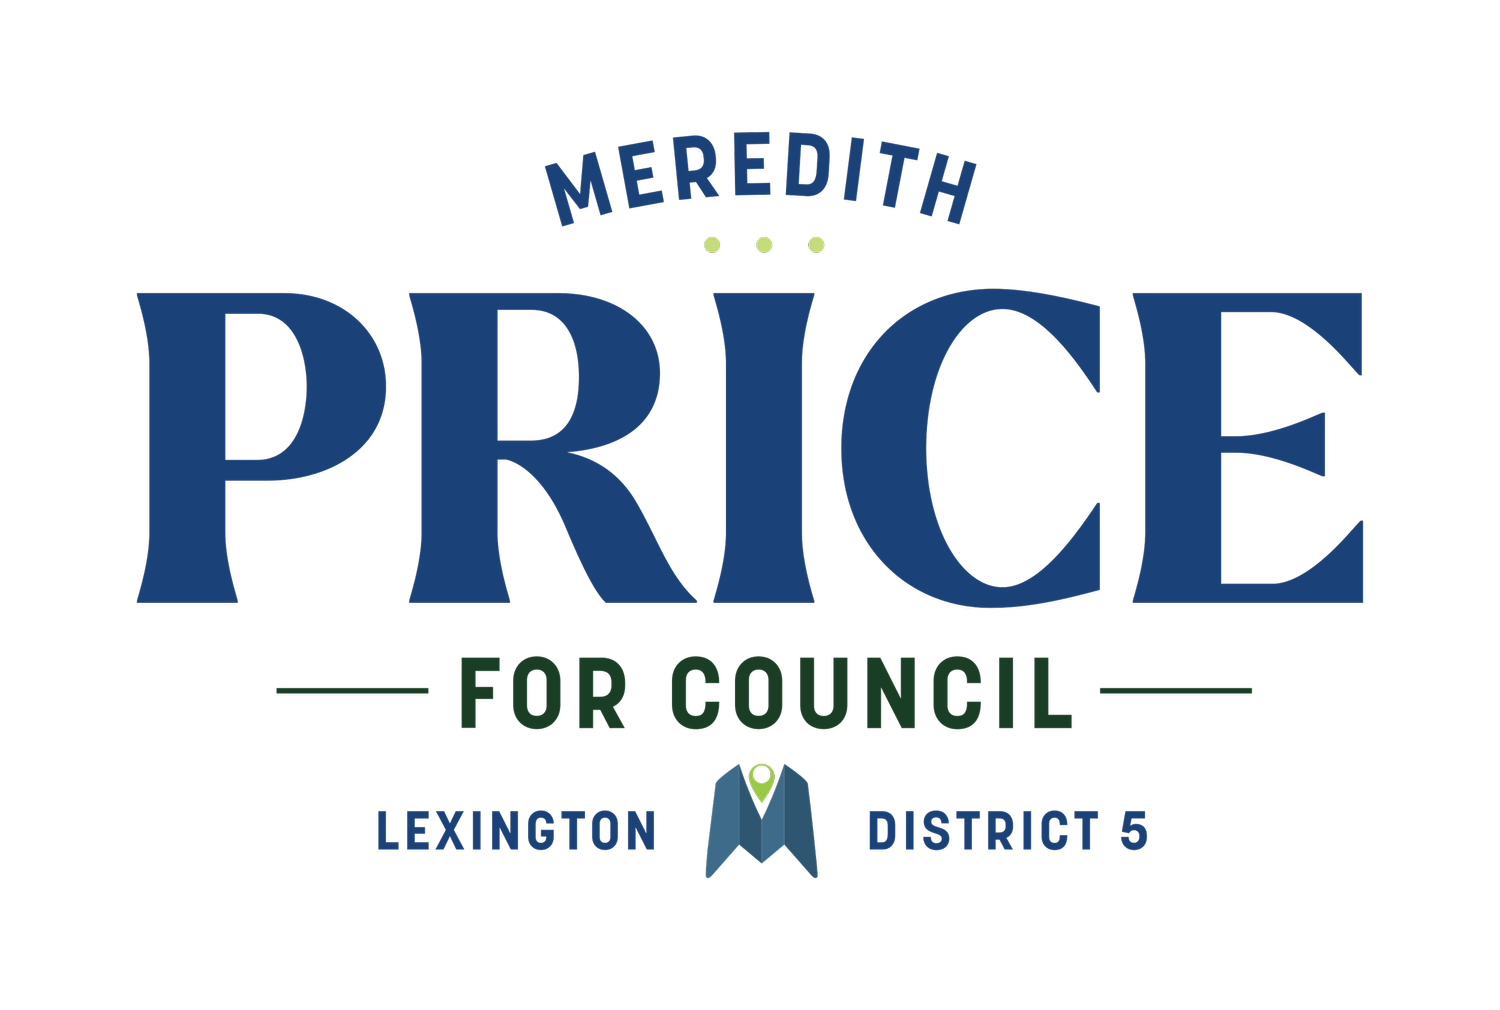 Meredith Price for Council